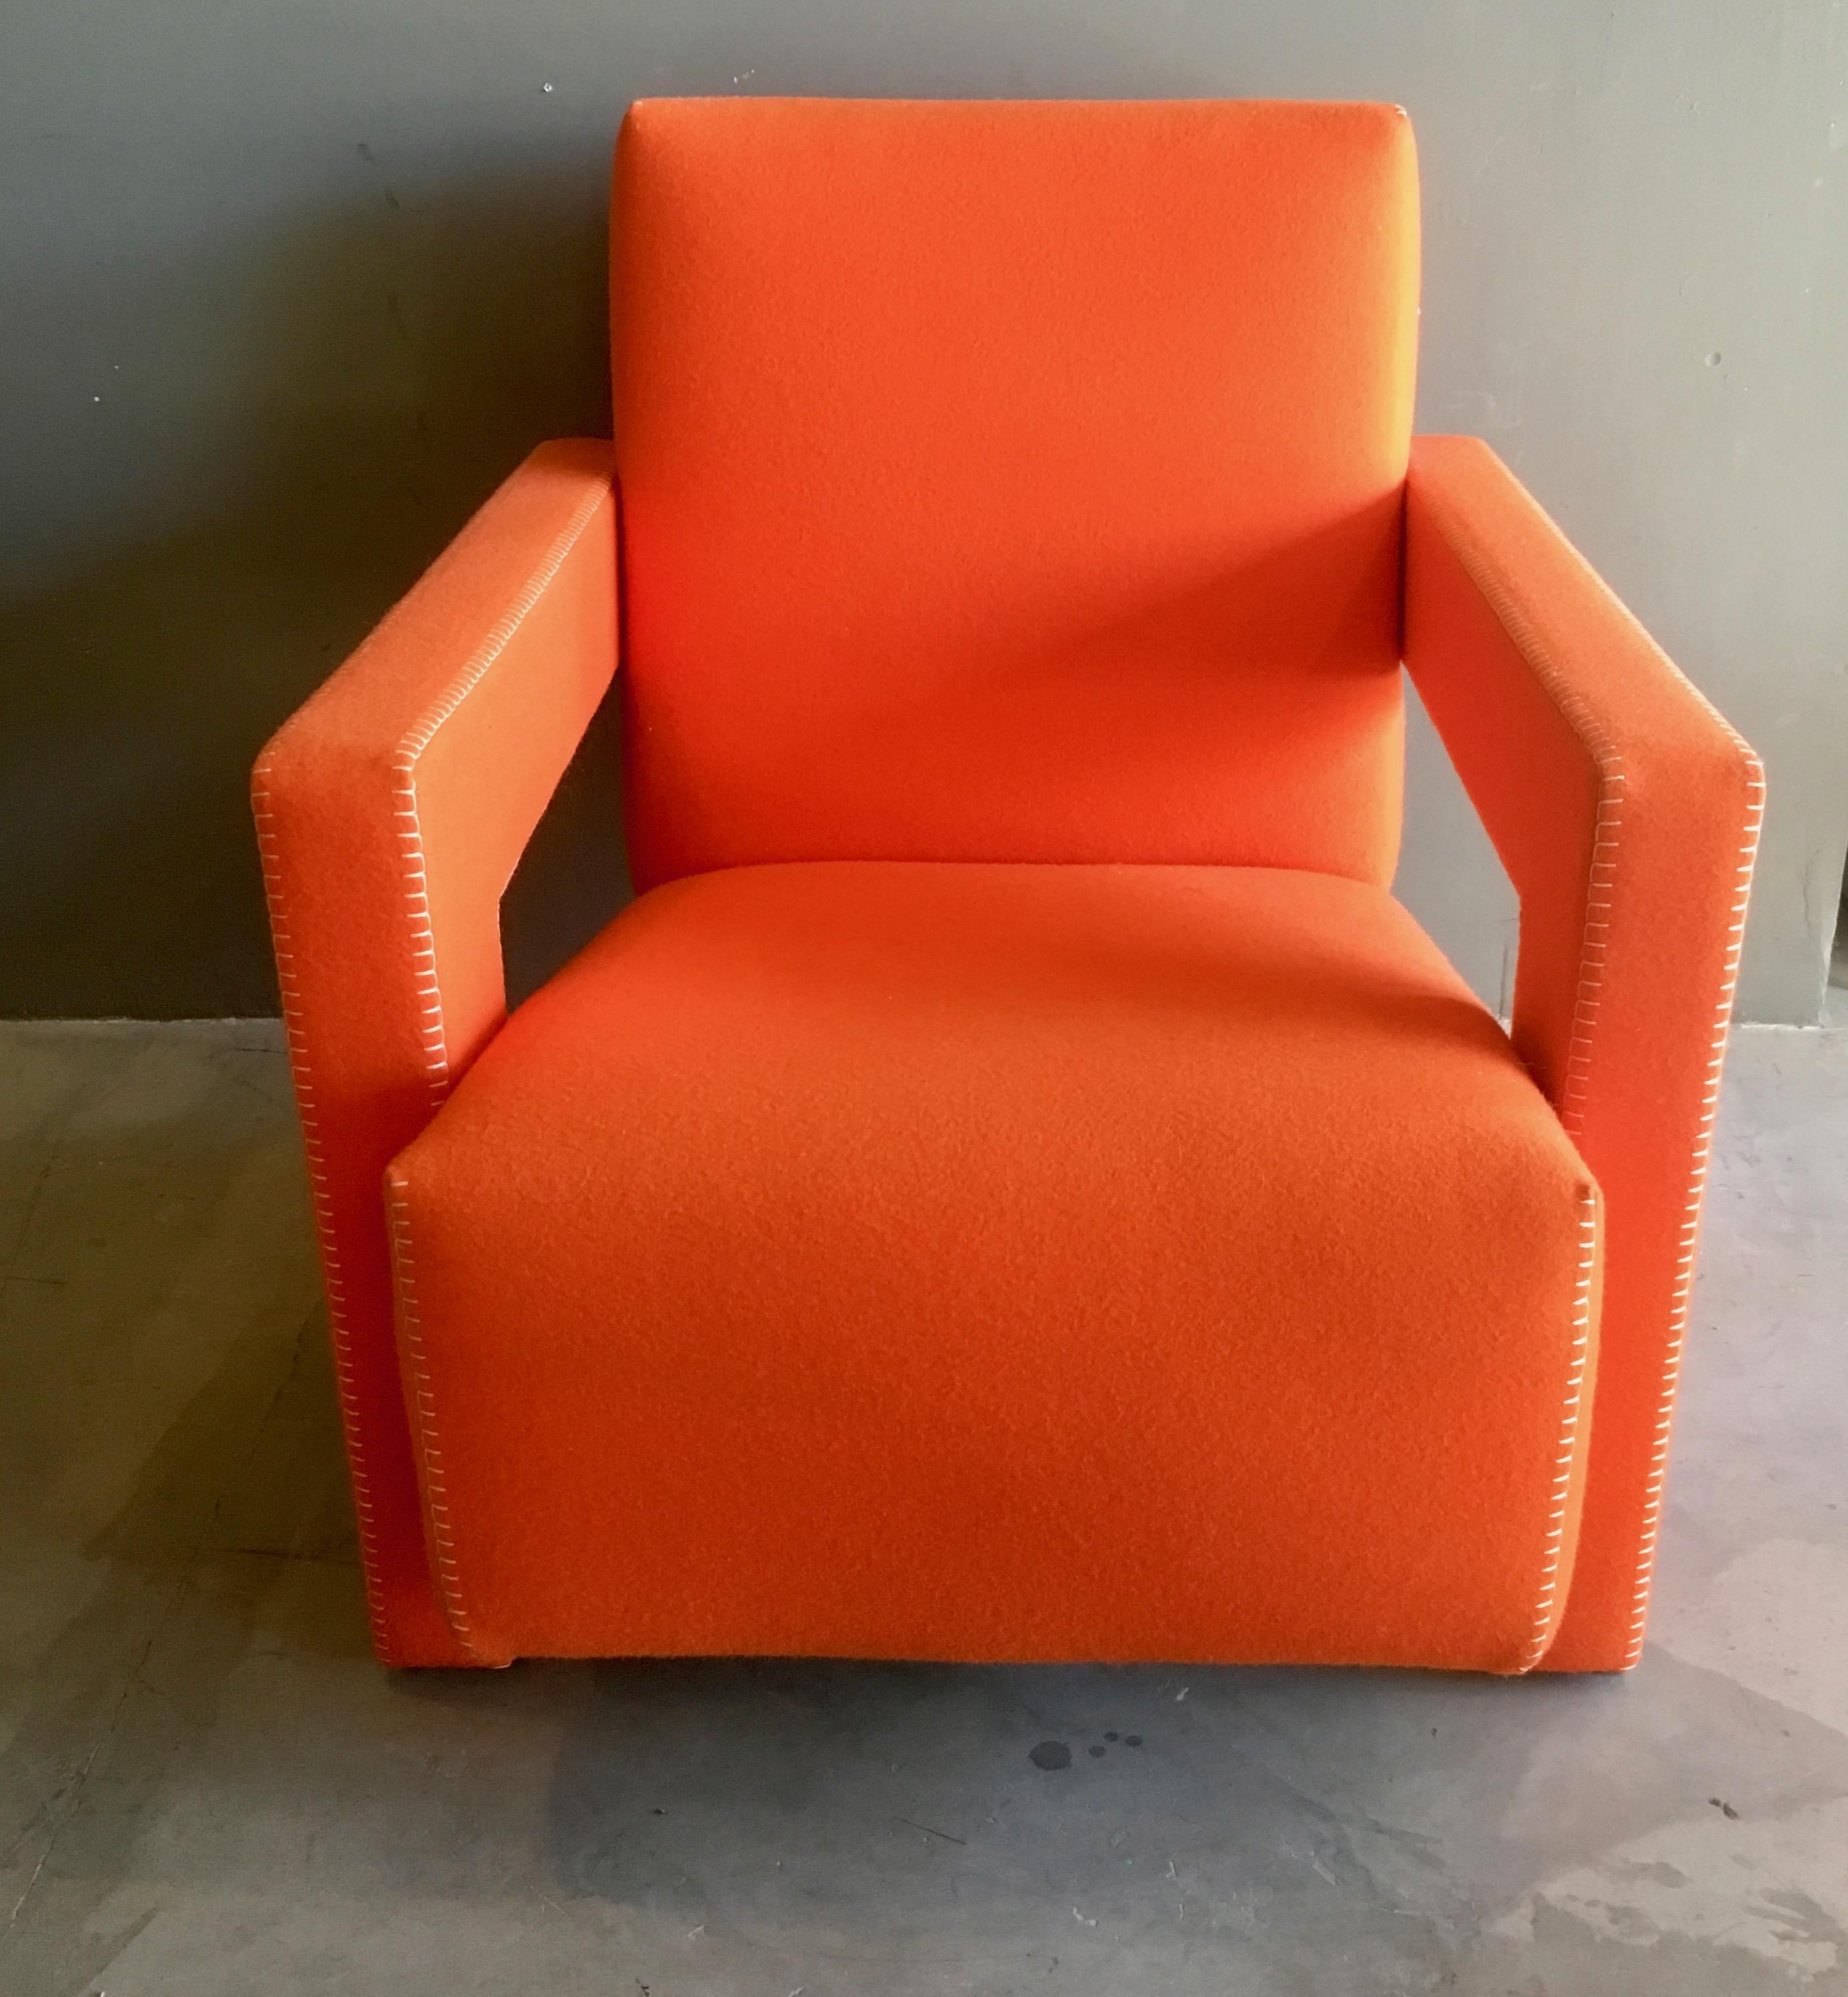 Gorgeous armchair designed by Gerrit Thomas Rietveld. Manufactured by Cassina with original label. Color is similar to Hermes orange. Very good condition. Extremely comfortable.